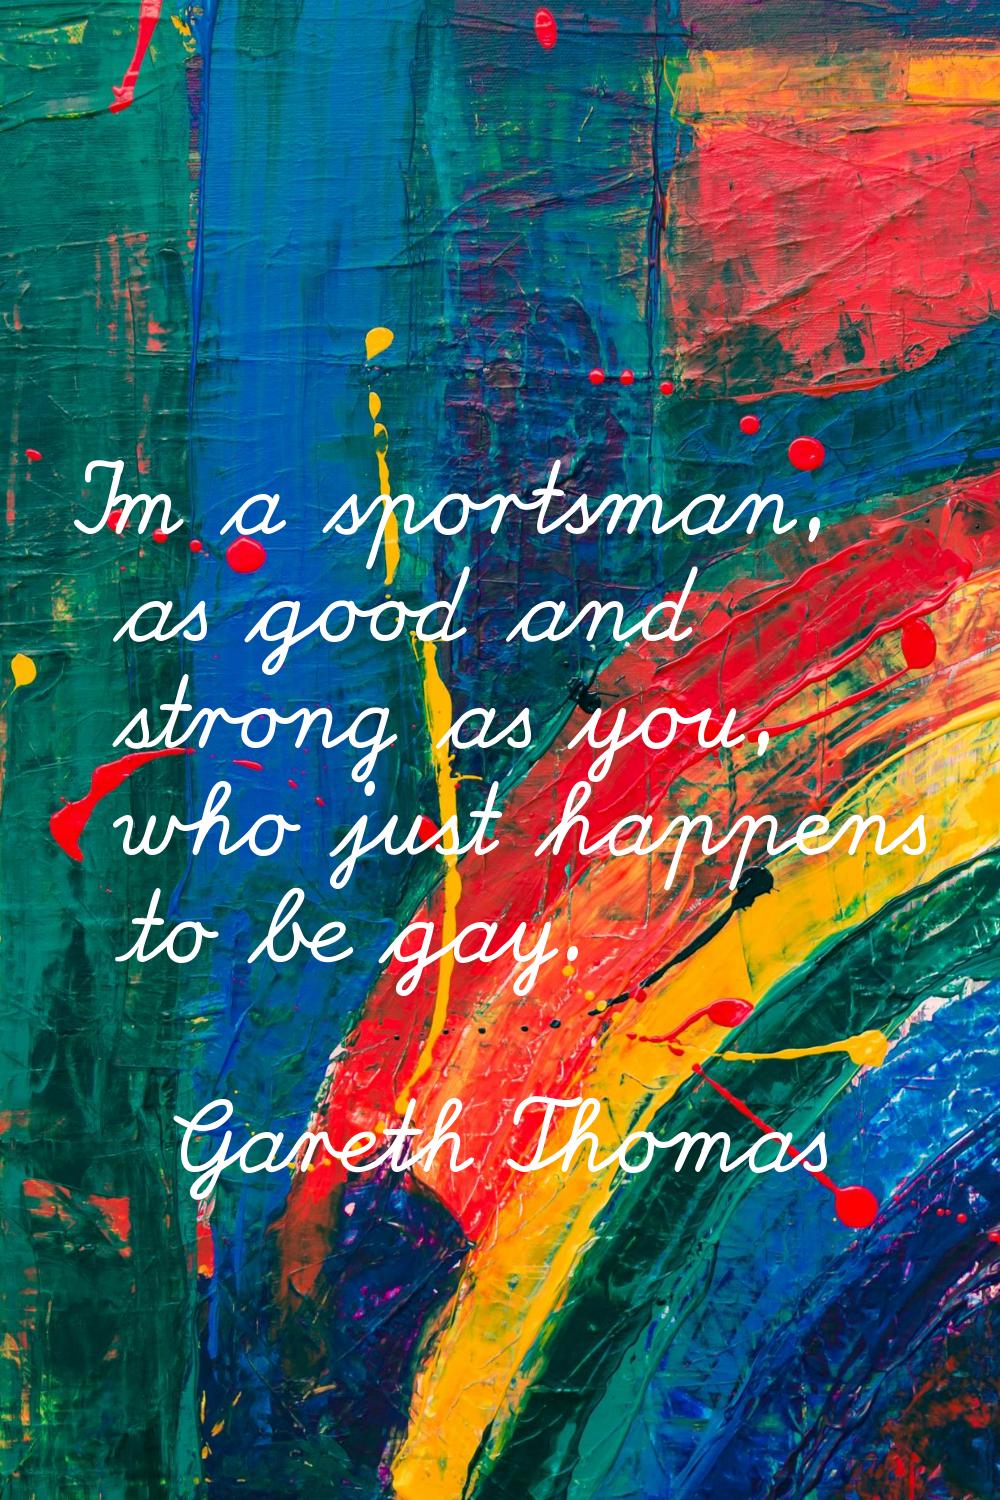 I'm a sportsman, as good and strong as you, who just happens to be gay.